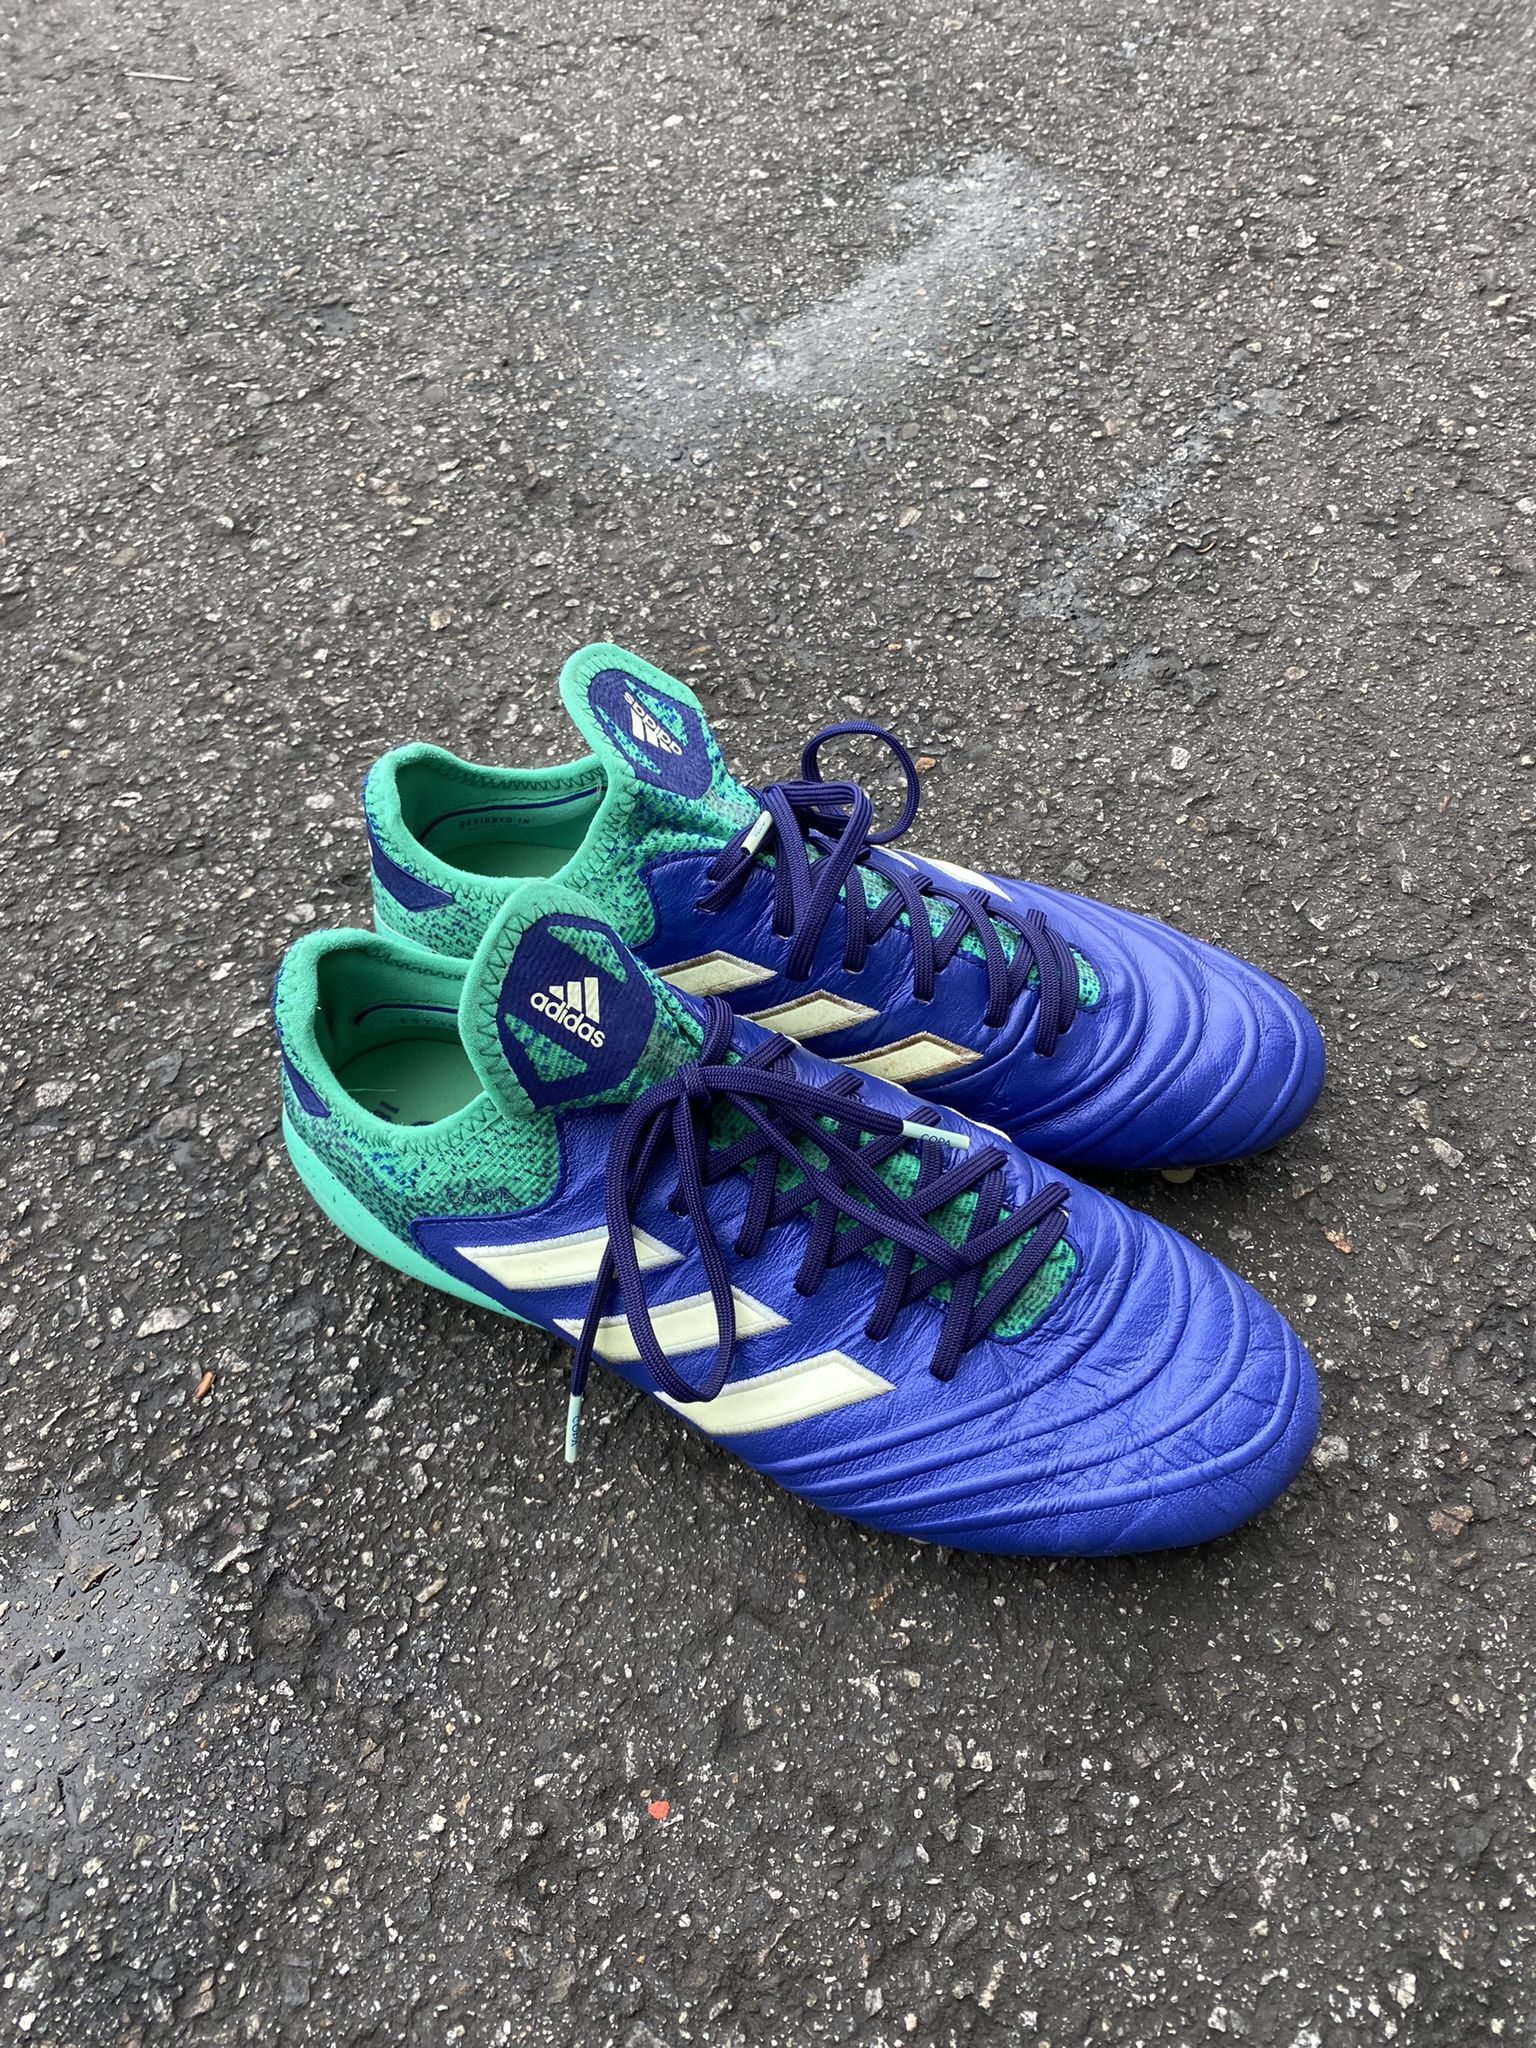 Adidas Copa Soccer Cleats 